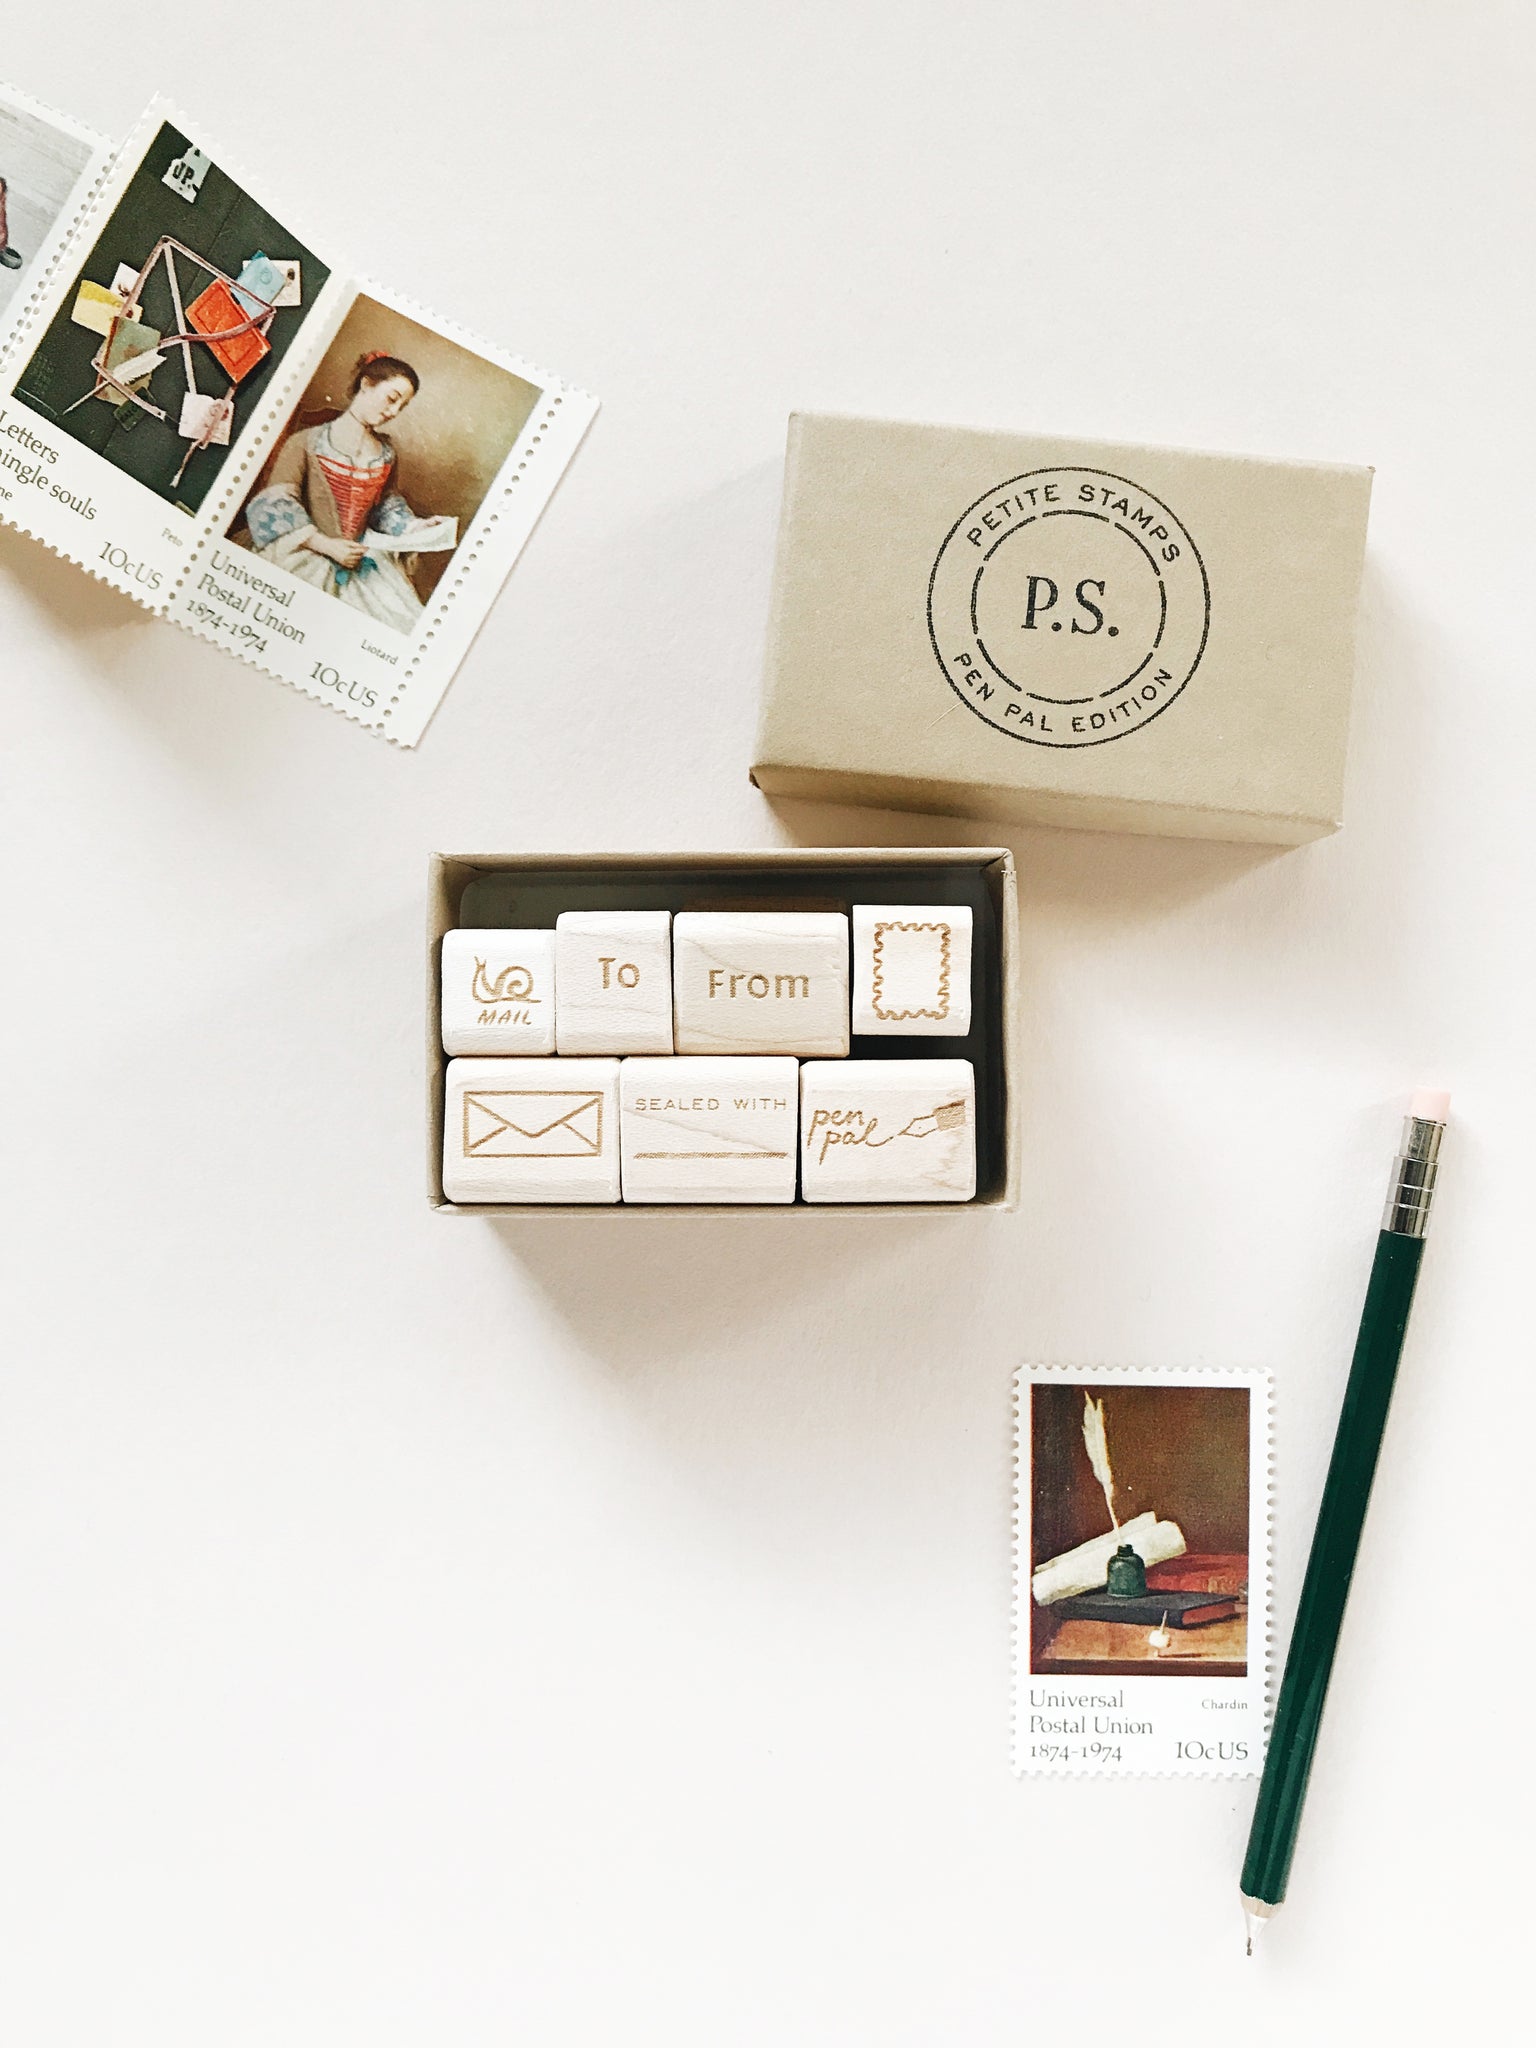 a set of 7 petite rubber stamps- housed in a kraft paper box. hand drawn images include: snail mail, to, from, rectangle blank postage stamp, envelope, sealed with (blank for fill in of your choice) and pen pal.